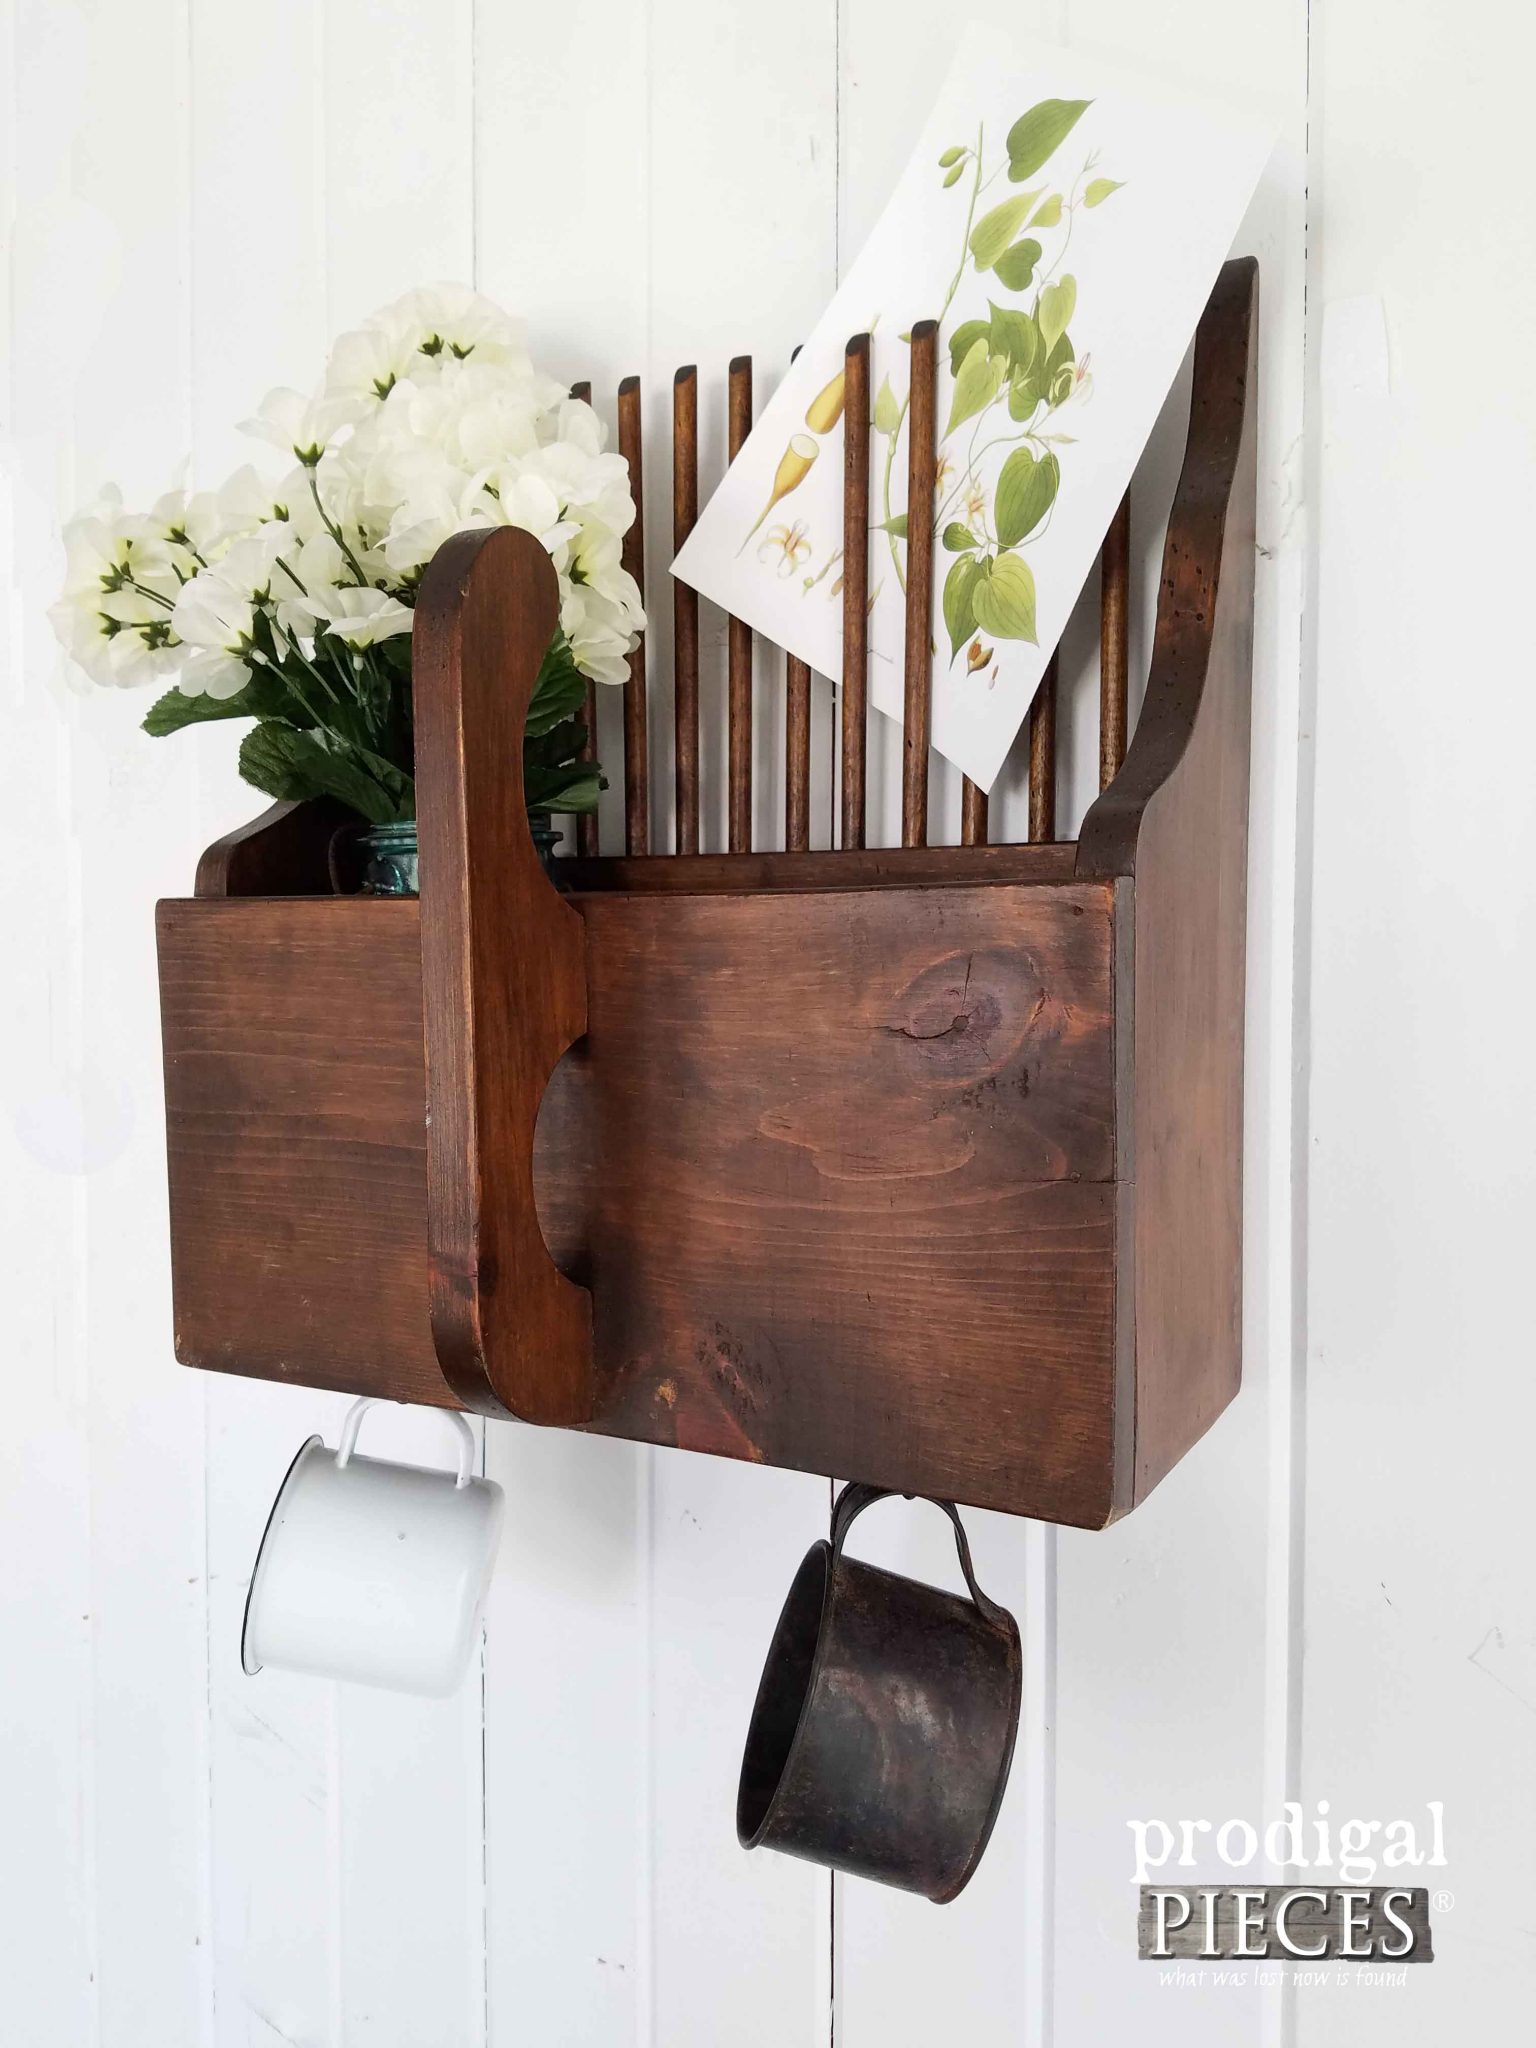 Repurposed Apple Picker Turned Wall Pocket for Thrifty Farmhouse Decor by Prodigal Pieces | prodigalpieces.com